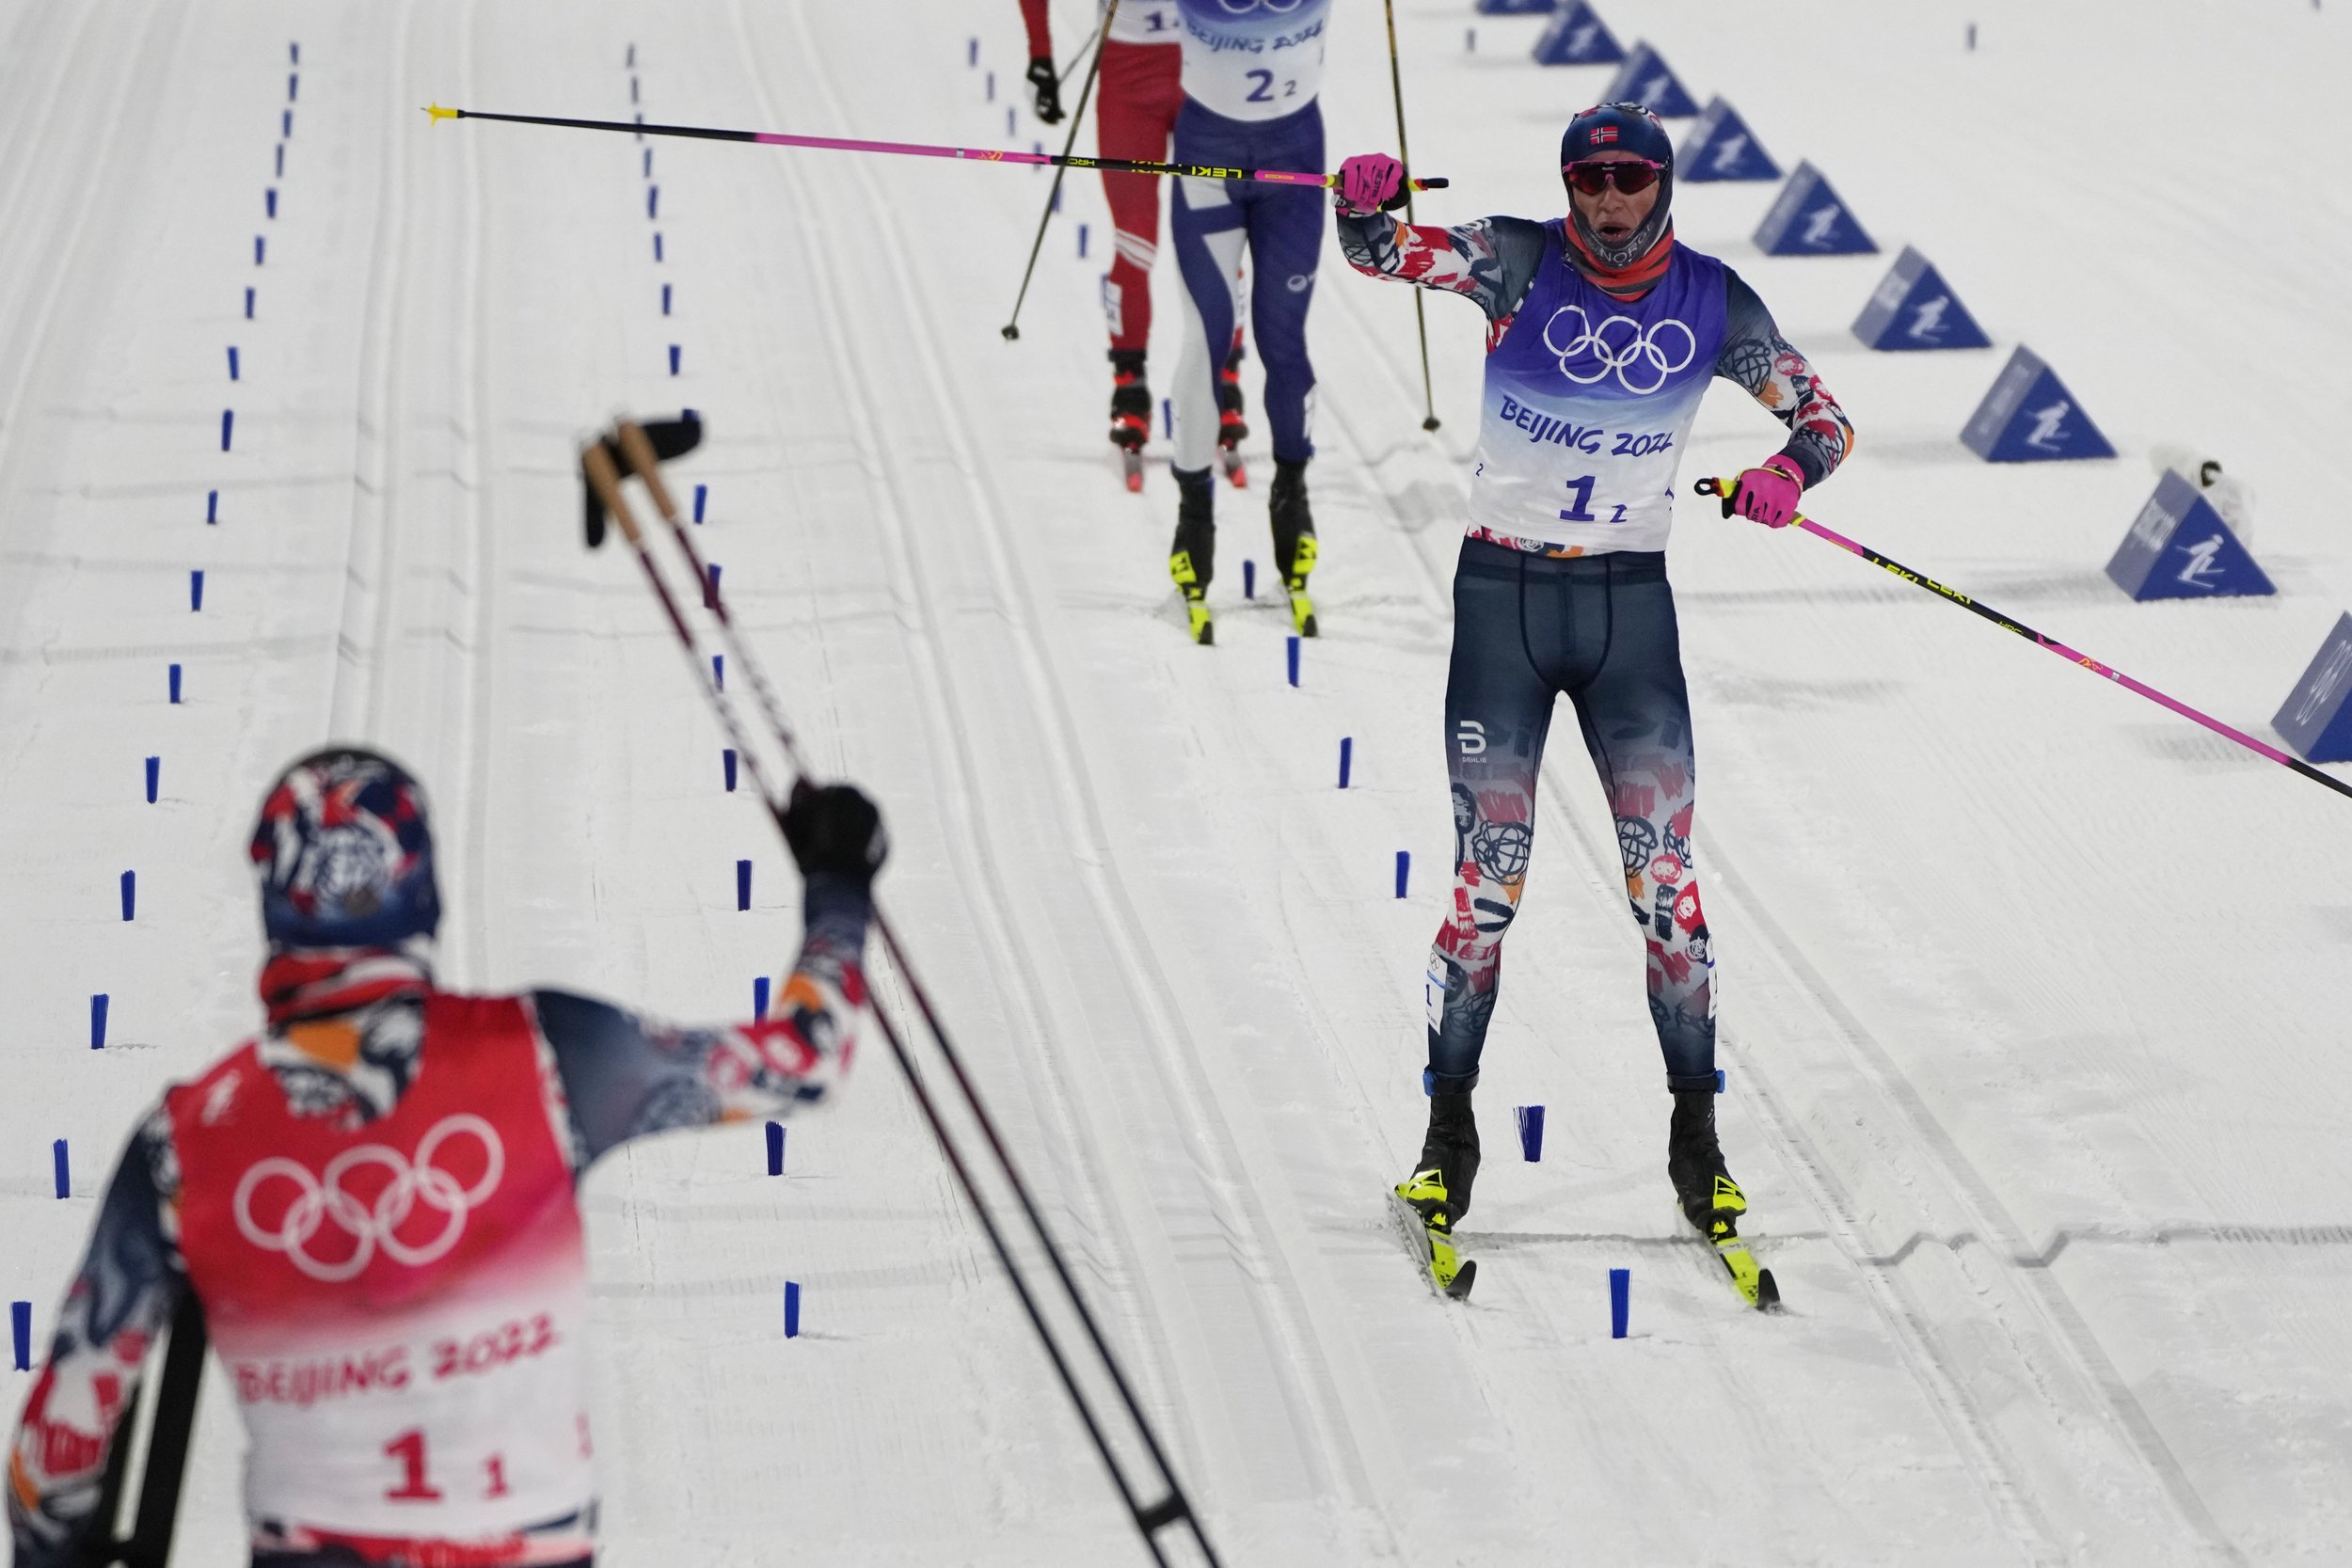  Johannes Hoesflot Klaebo, of Norway, right, celebrates as he nears the finish with Erik Valnes, of Norway, left, during the men's team sprint classic cross-country skiing competition at the 2022 Winter Olympics, Wednesday, Feb. 16, 2022, in Zhangjia